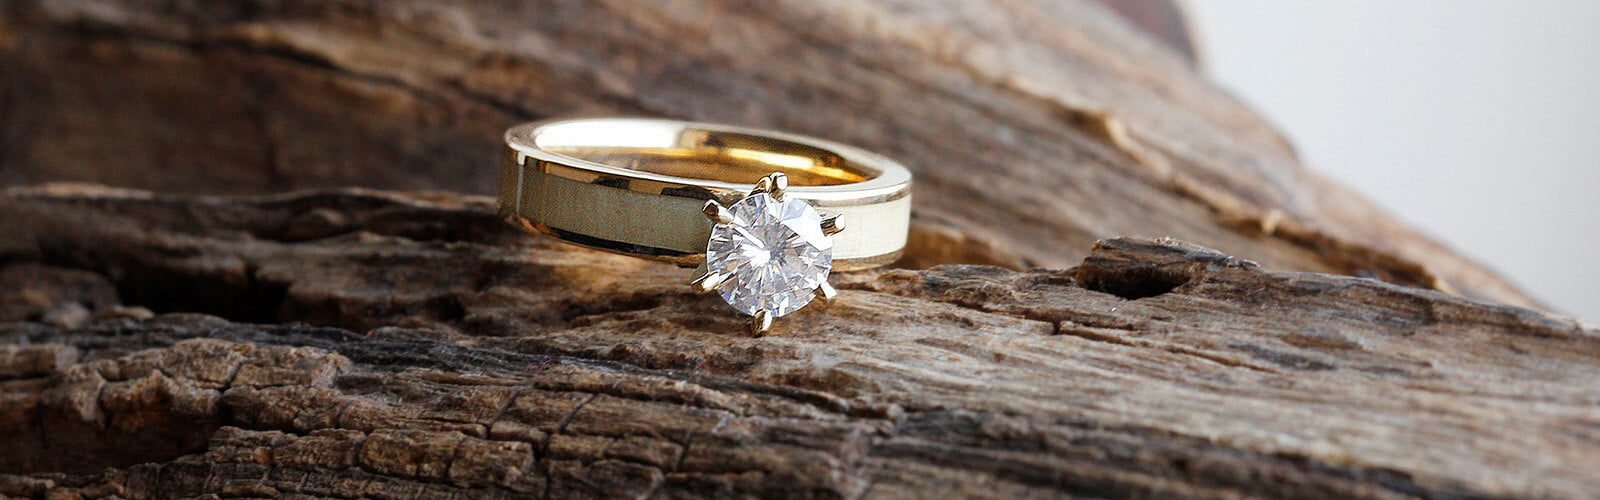 Solitaire Moissanite Engagement Ring With Maple Burl | Jewelry by Johan -  Jewelry by Johan